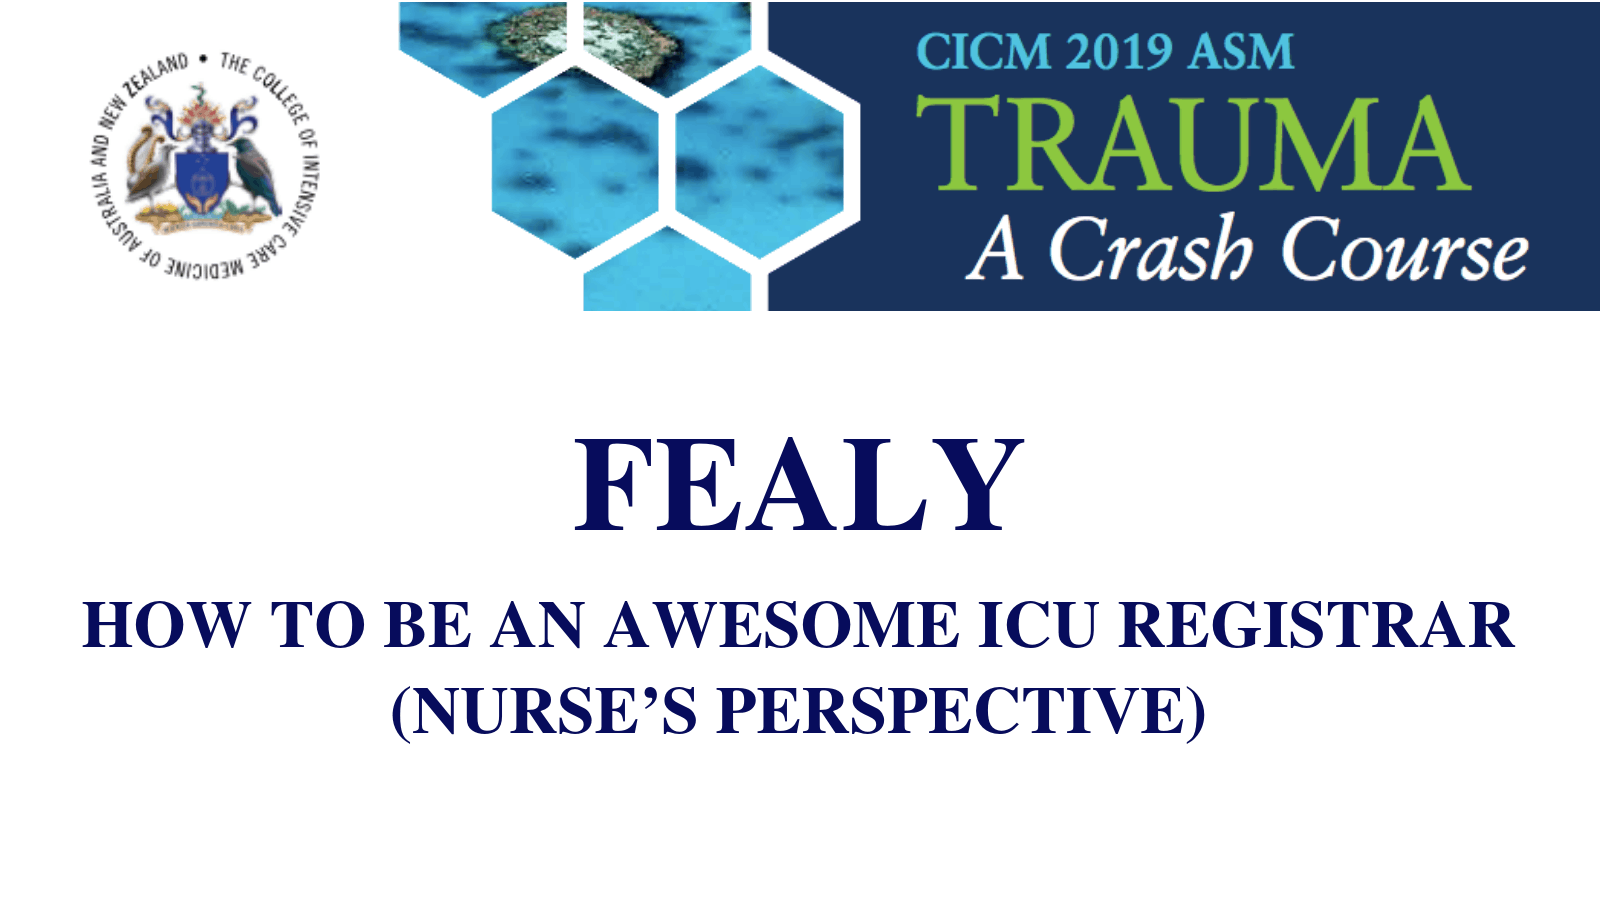 How to be an awesome ICU registrar (nurse’s perspective).